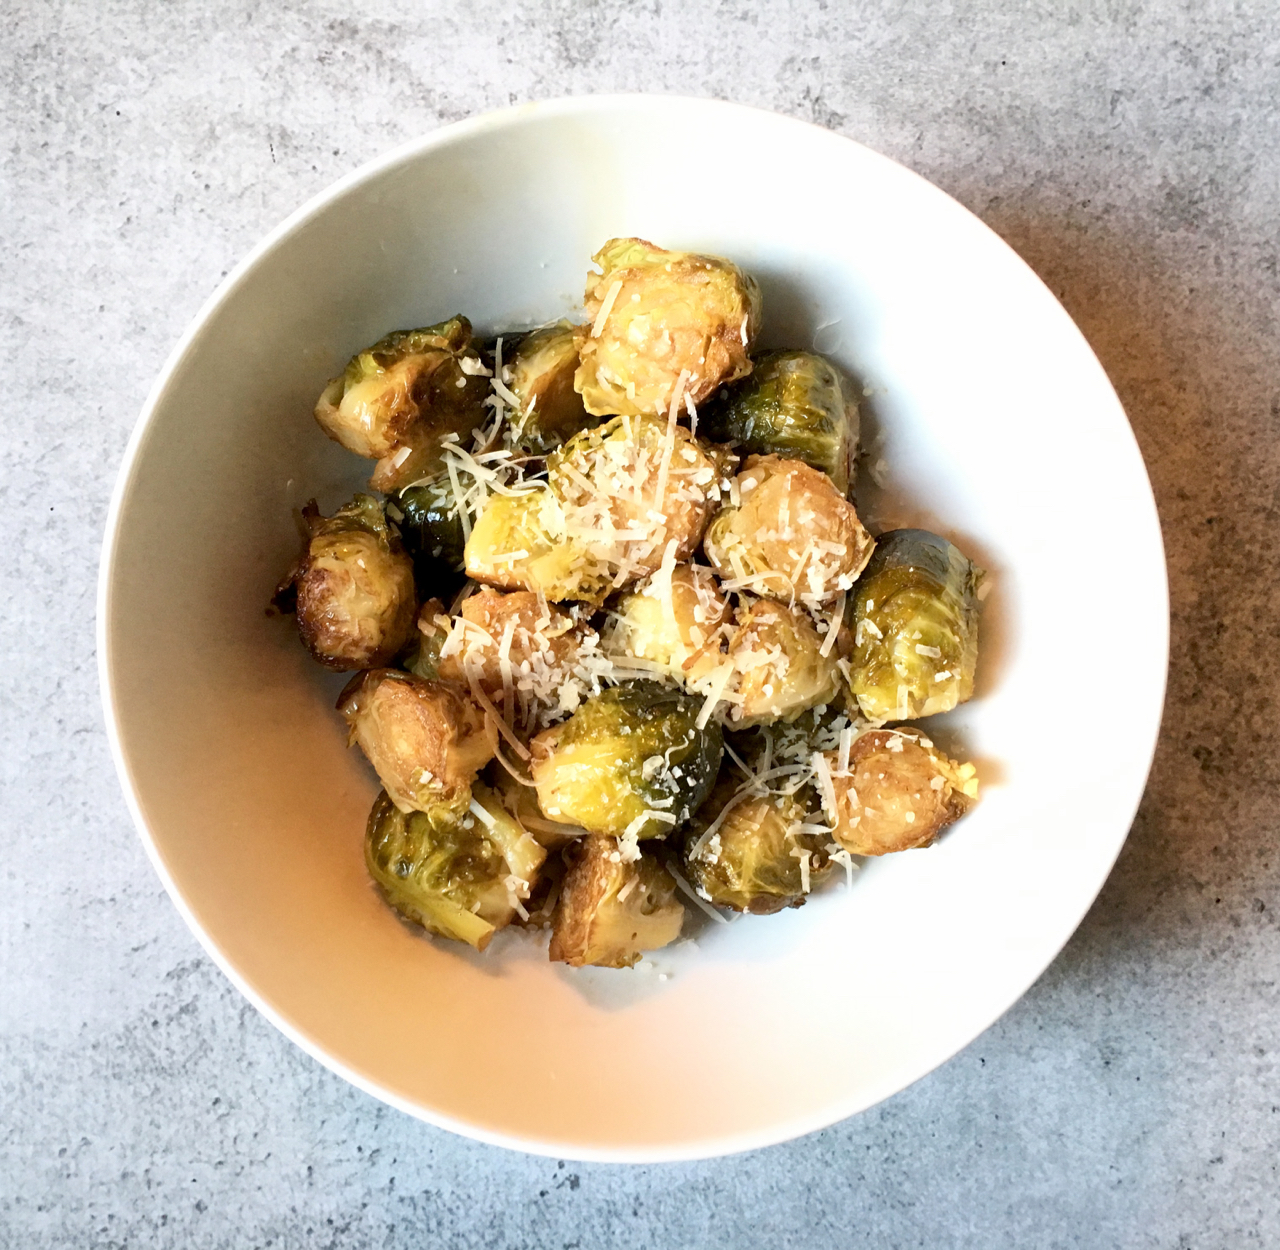 Roasted Brussels Sprouts With Balsamic Vinegar and Parmesan Cheese